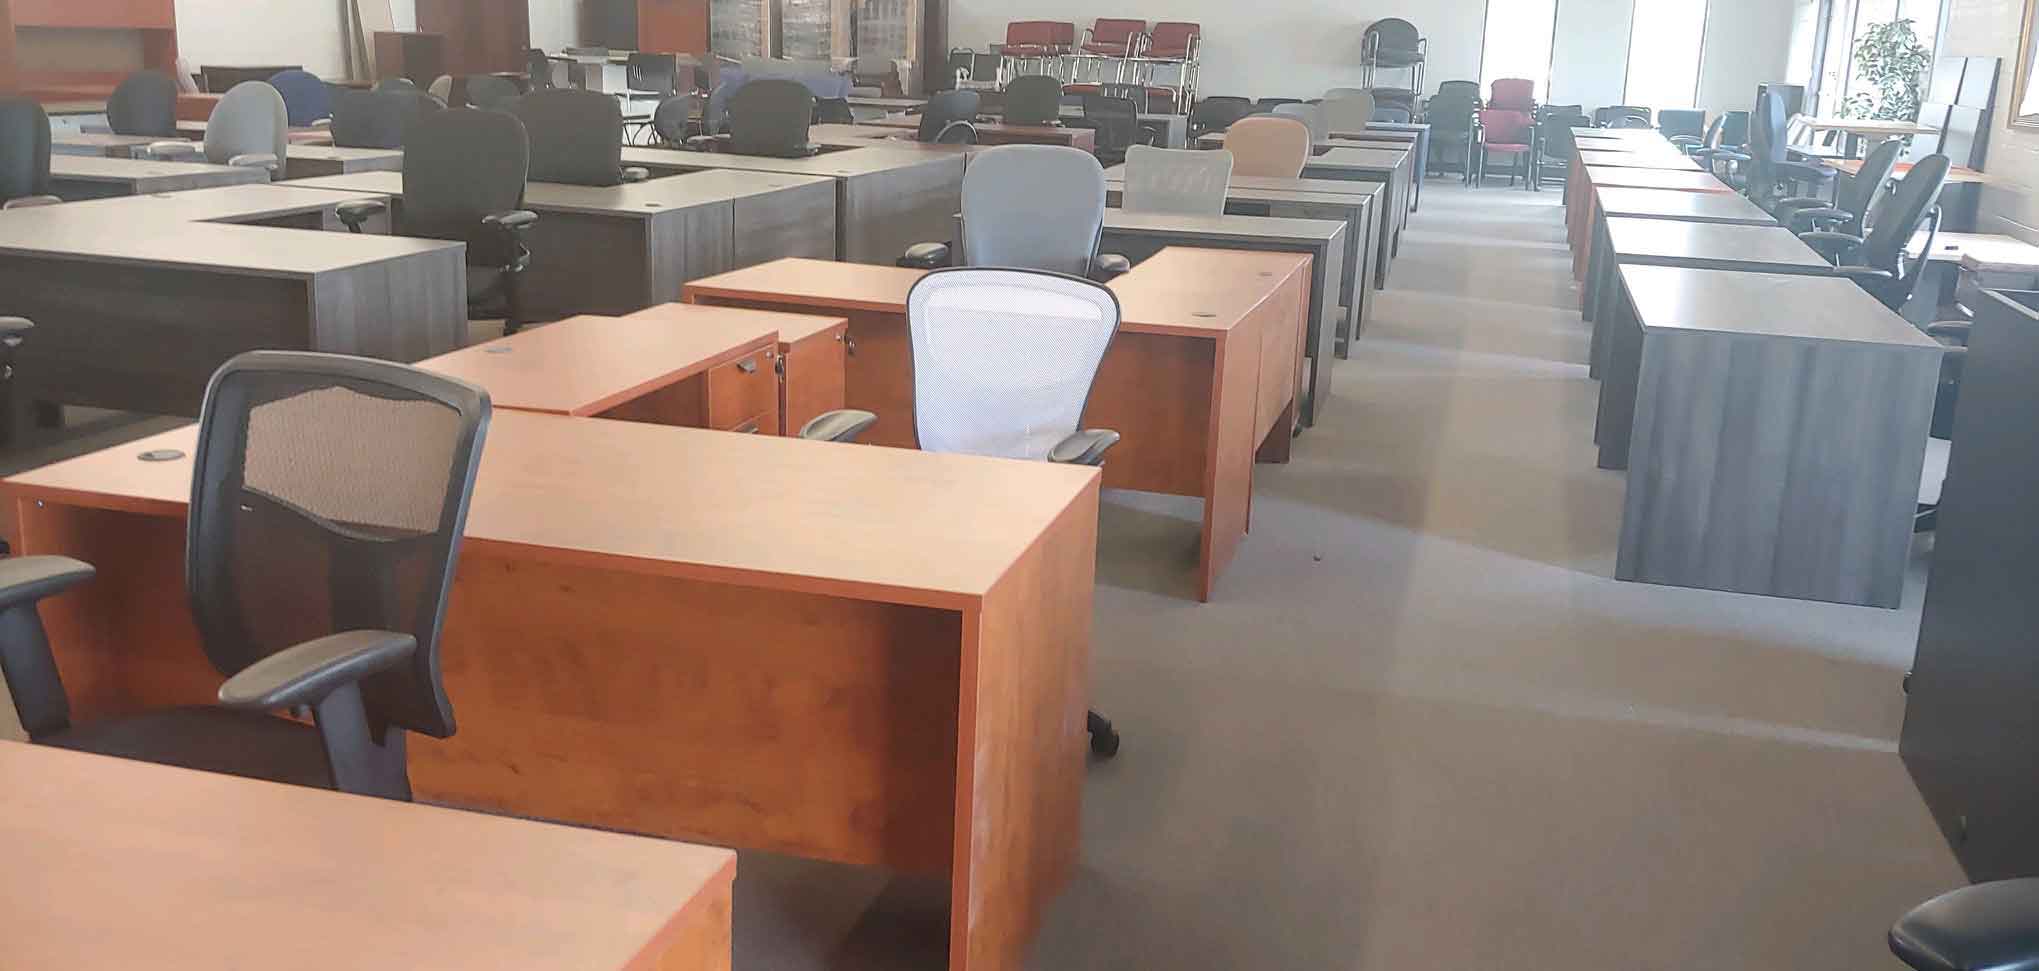 Corporate Office Furniture  At Corporate Office Furniture, we love to hear  from our customers. If you have any questions, comments or concerns, please  let us know and we will do our